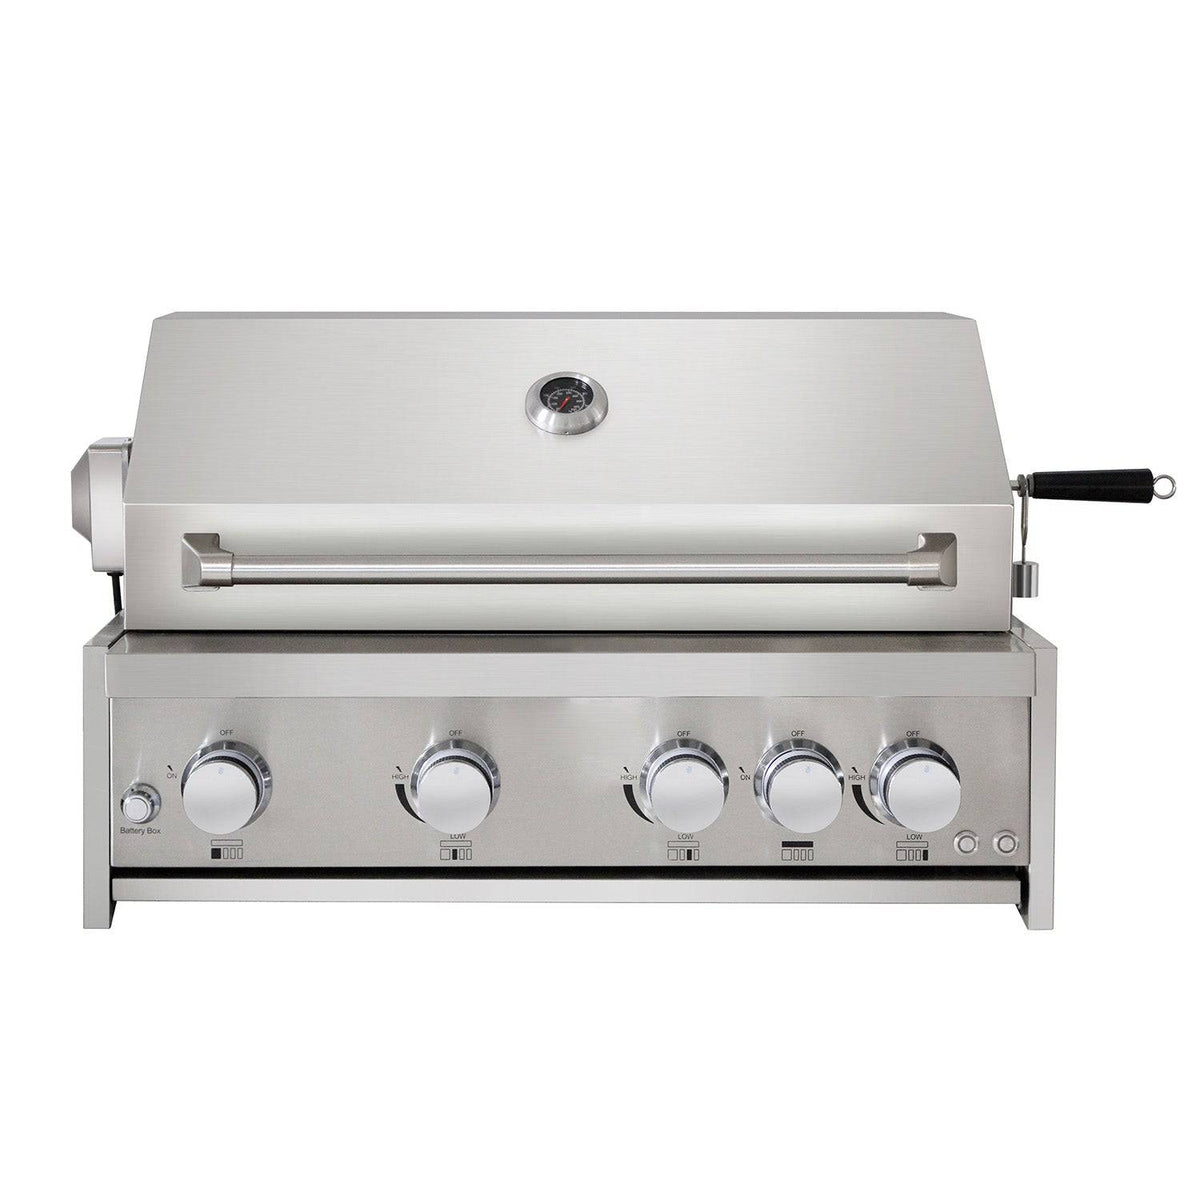 Fobest 32 Inch 4 Burners Stainless Steel Outdoor Gas BBQ Grill with Rotisserie - Gas BBQ Grill-Fobest Appliance